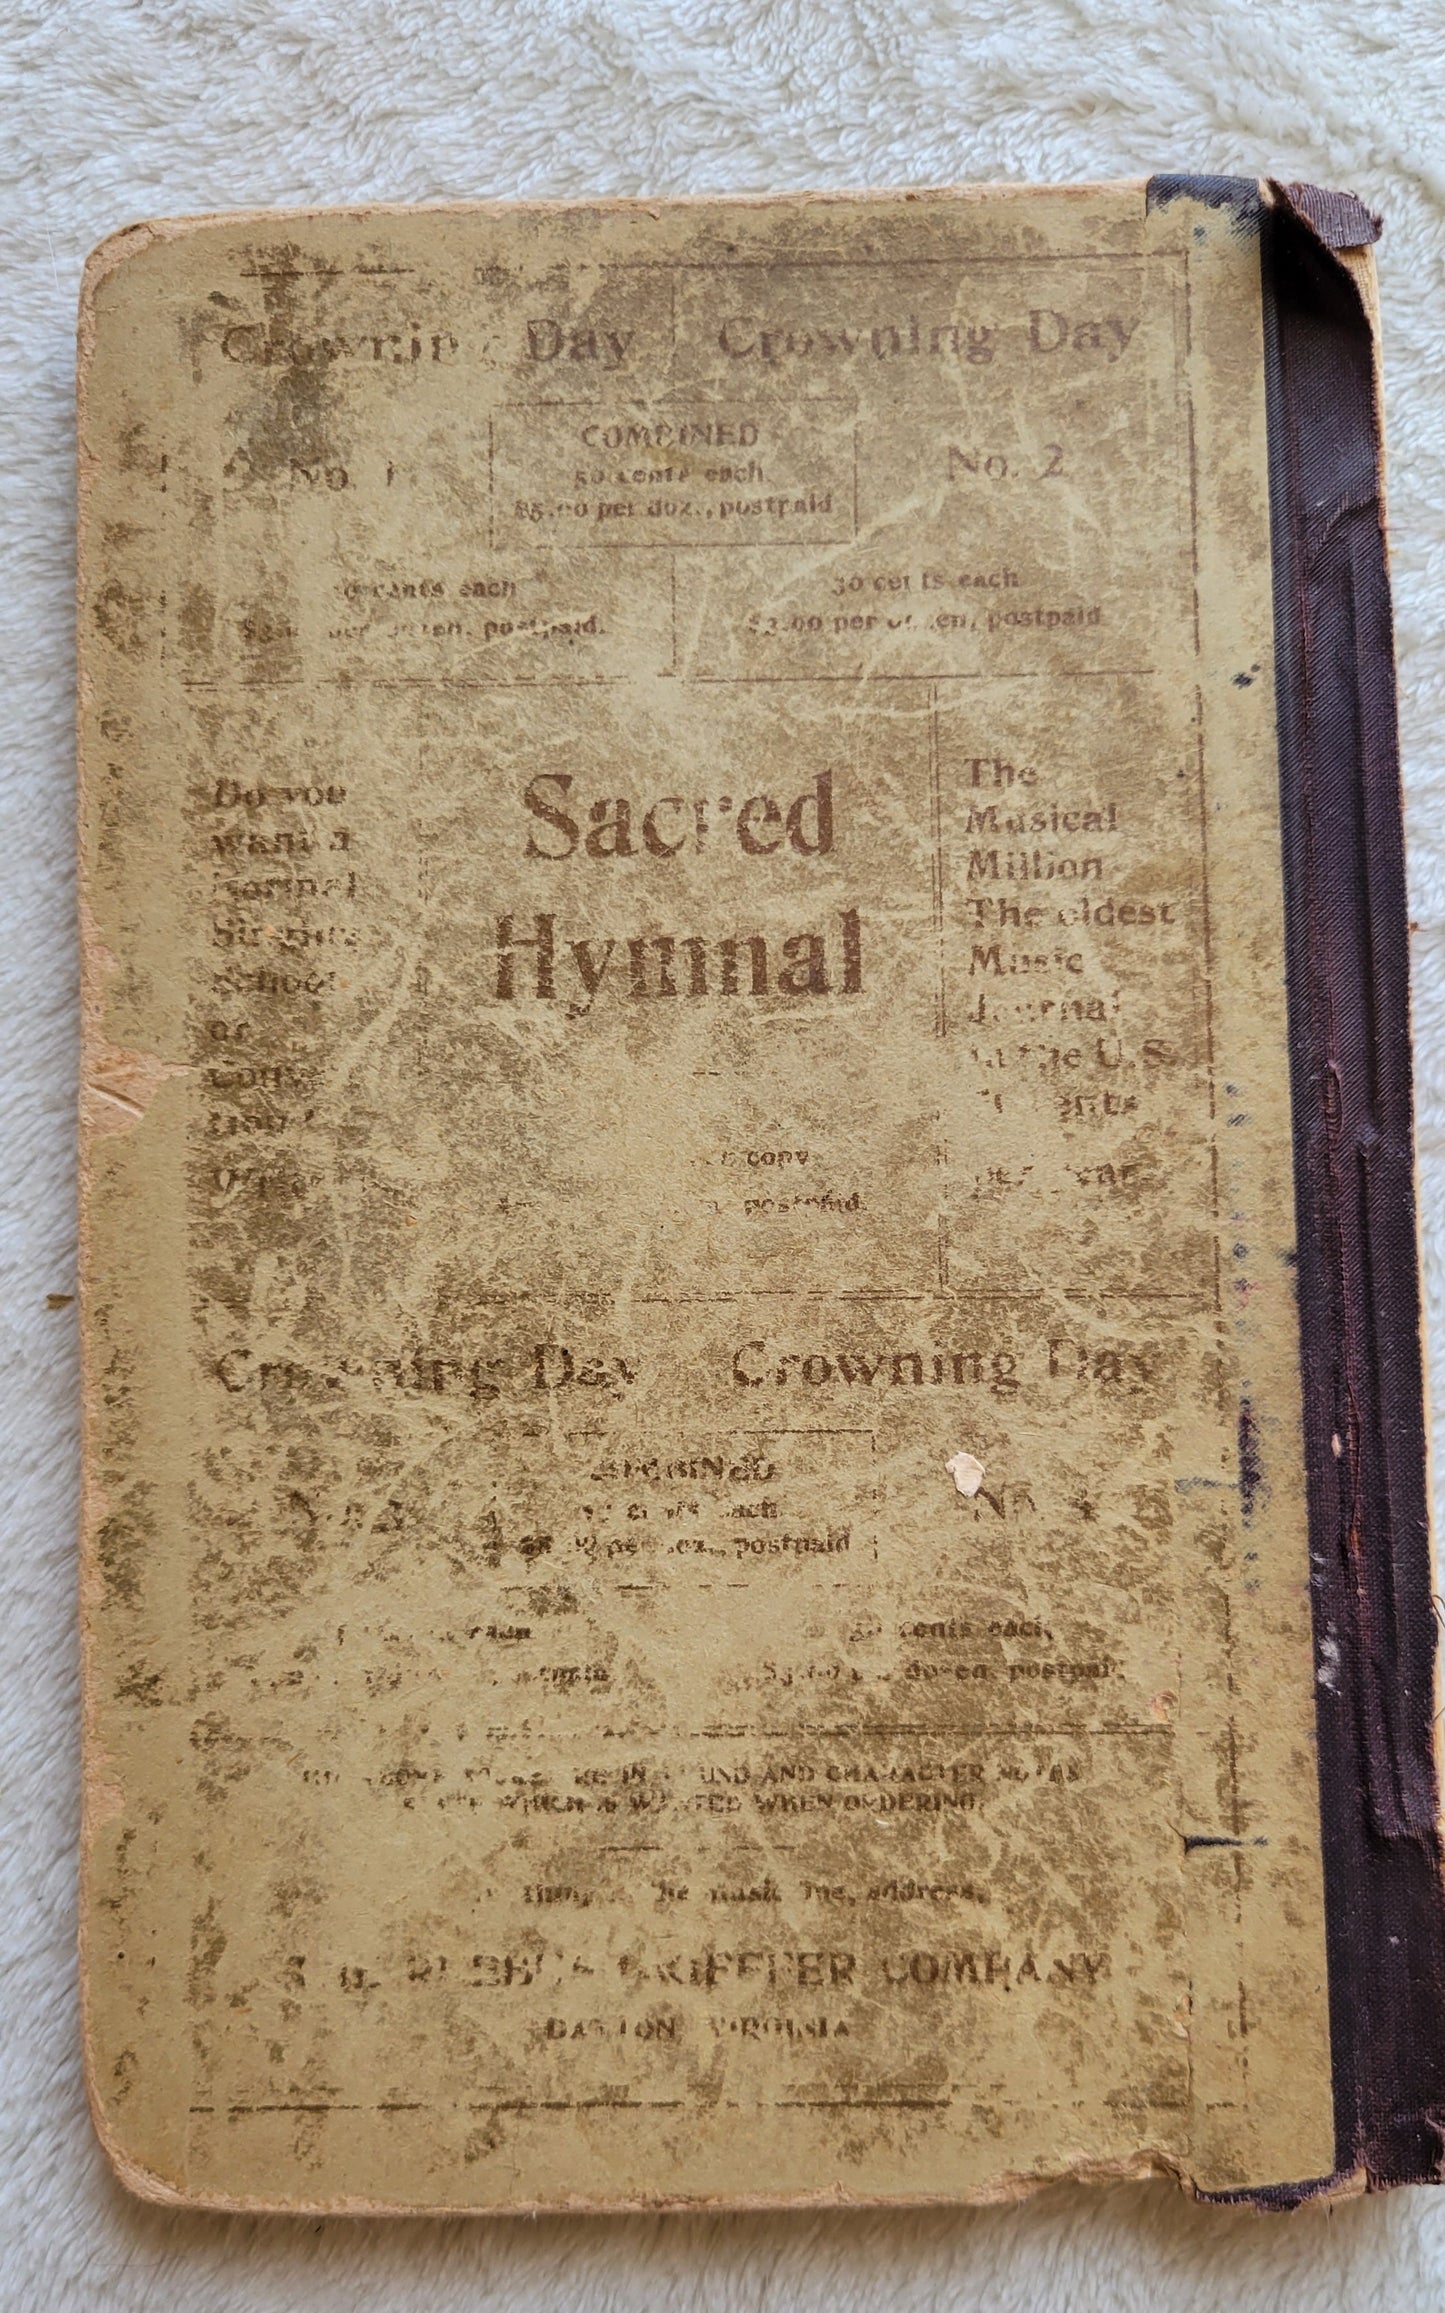 Antique book Crowning Day No. 5 is a Christian hymn book, copyrighted in 1902 by J. H. Hall, W. H. Ruebush, and J. H. Ruebush and published by the Ruebush-Kieffer Company, Dayton, Virginia.  View of back cover.